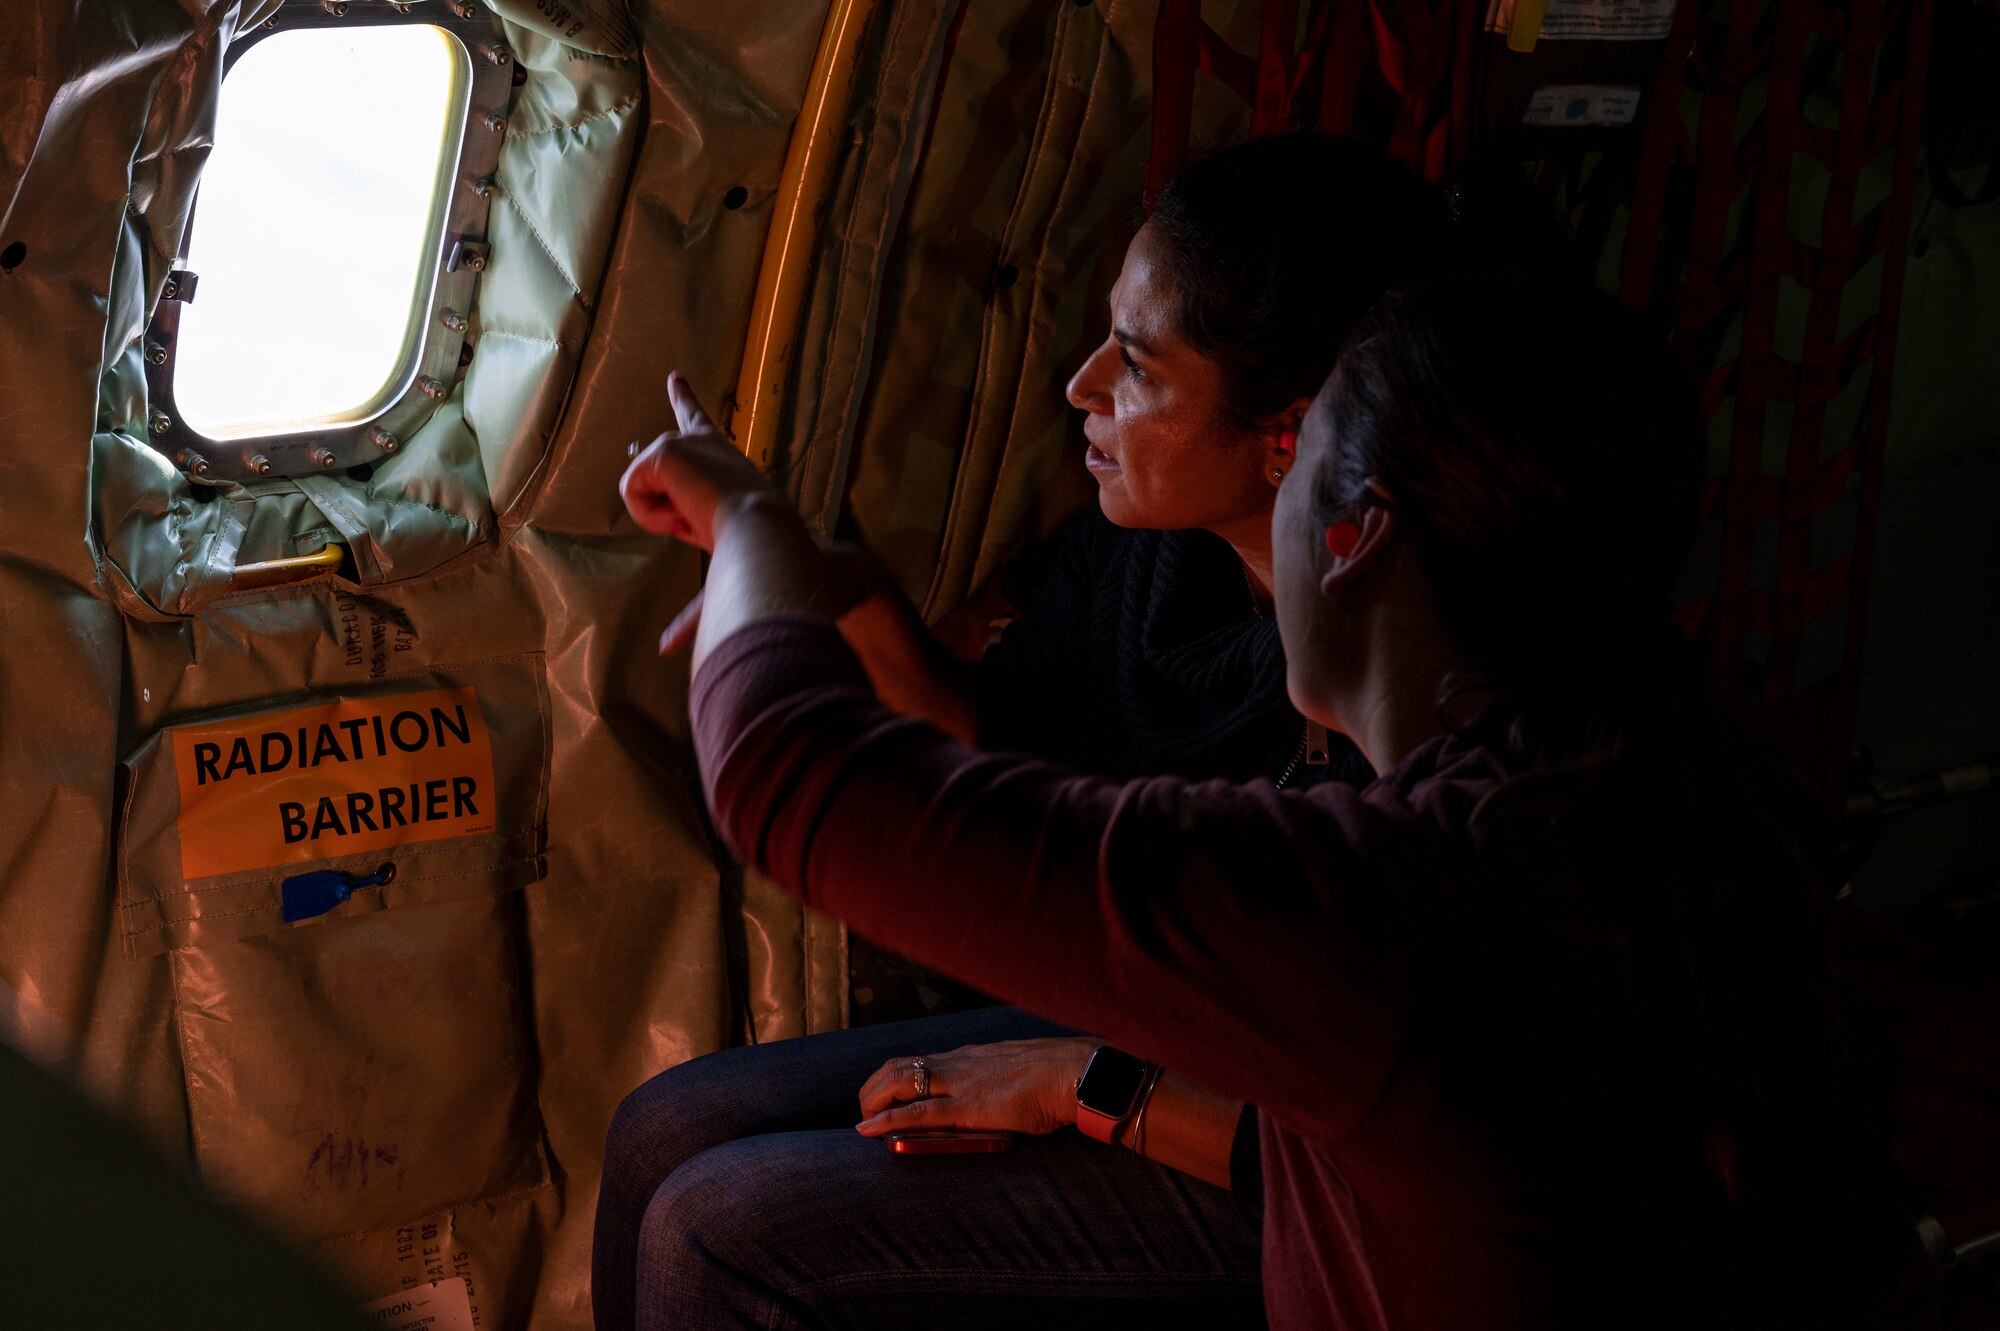 Desi Brown, a 311th Fighter Squadron member’s spouse, left, and Katie Depaola, a 311th Fighter Squadron member's spouse, look out the window of a KC-135 Stratotanker from the 121st Air Refueling Wing at Rickenbacker Air National Guard Base, Columbus, Ohio, Nov. 15, 2022.